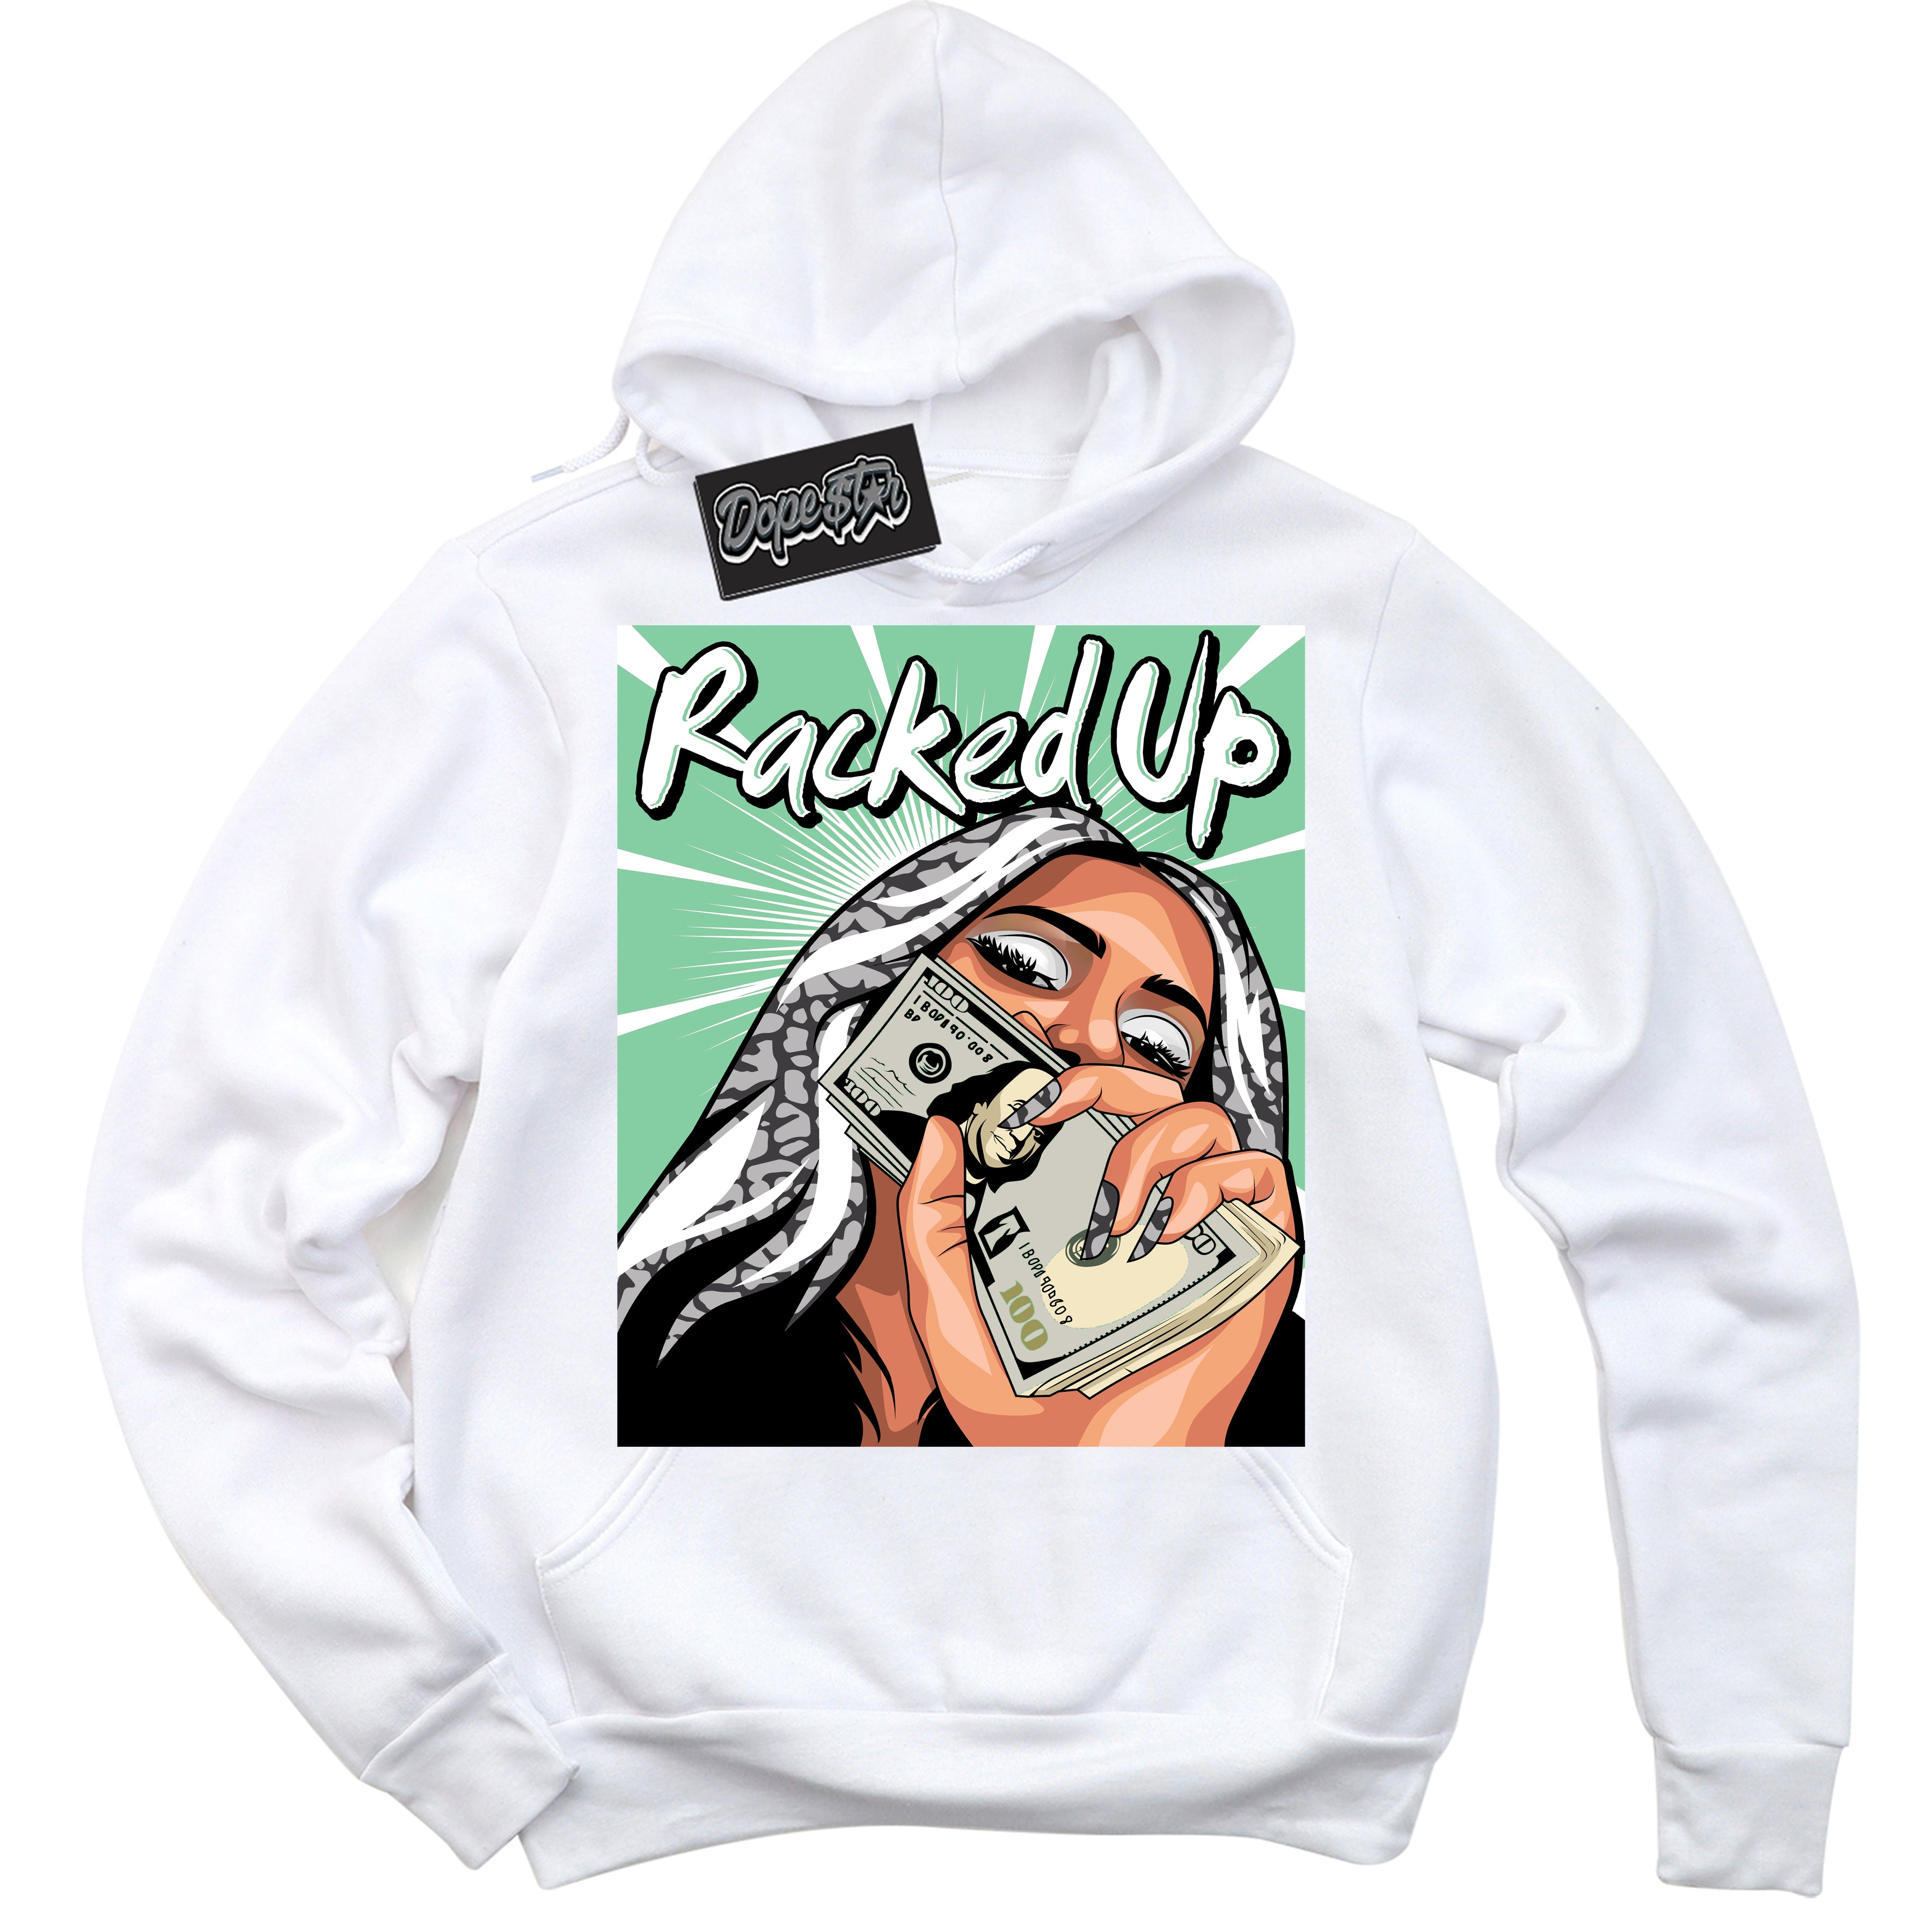 Cool White Graphic DopeStar Hoodie with “ Racked Up “ print, that perfectly matches Green Glow 3s sneakers